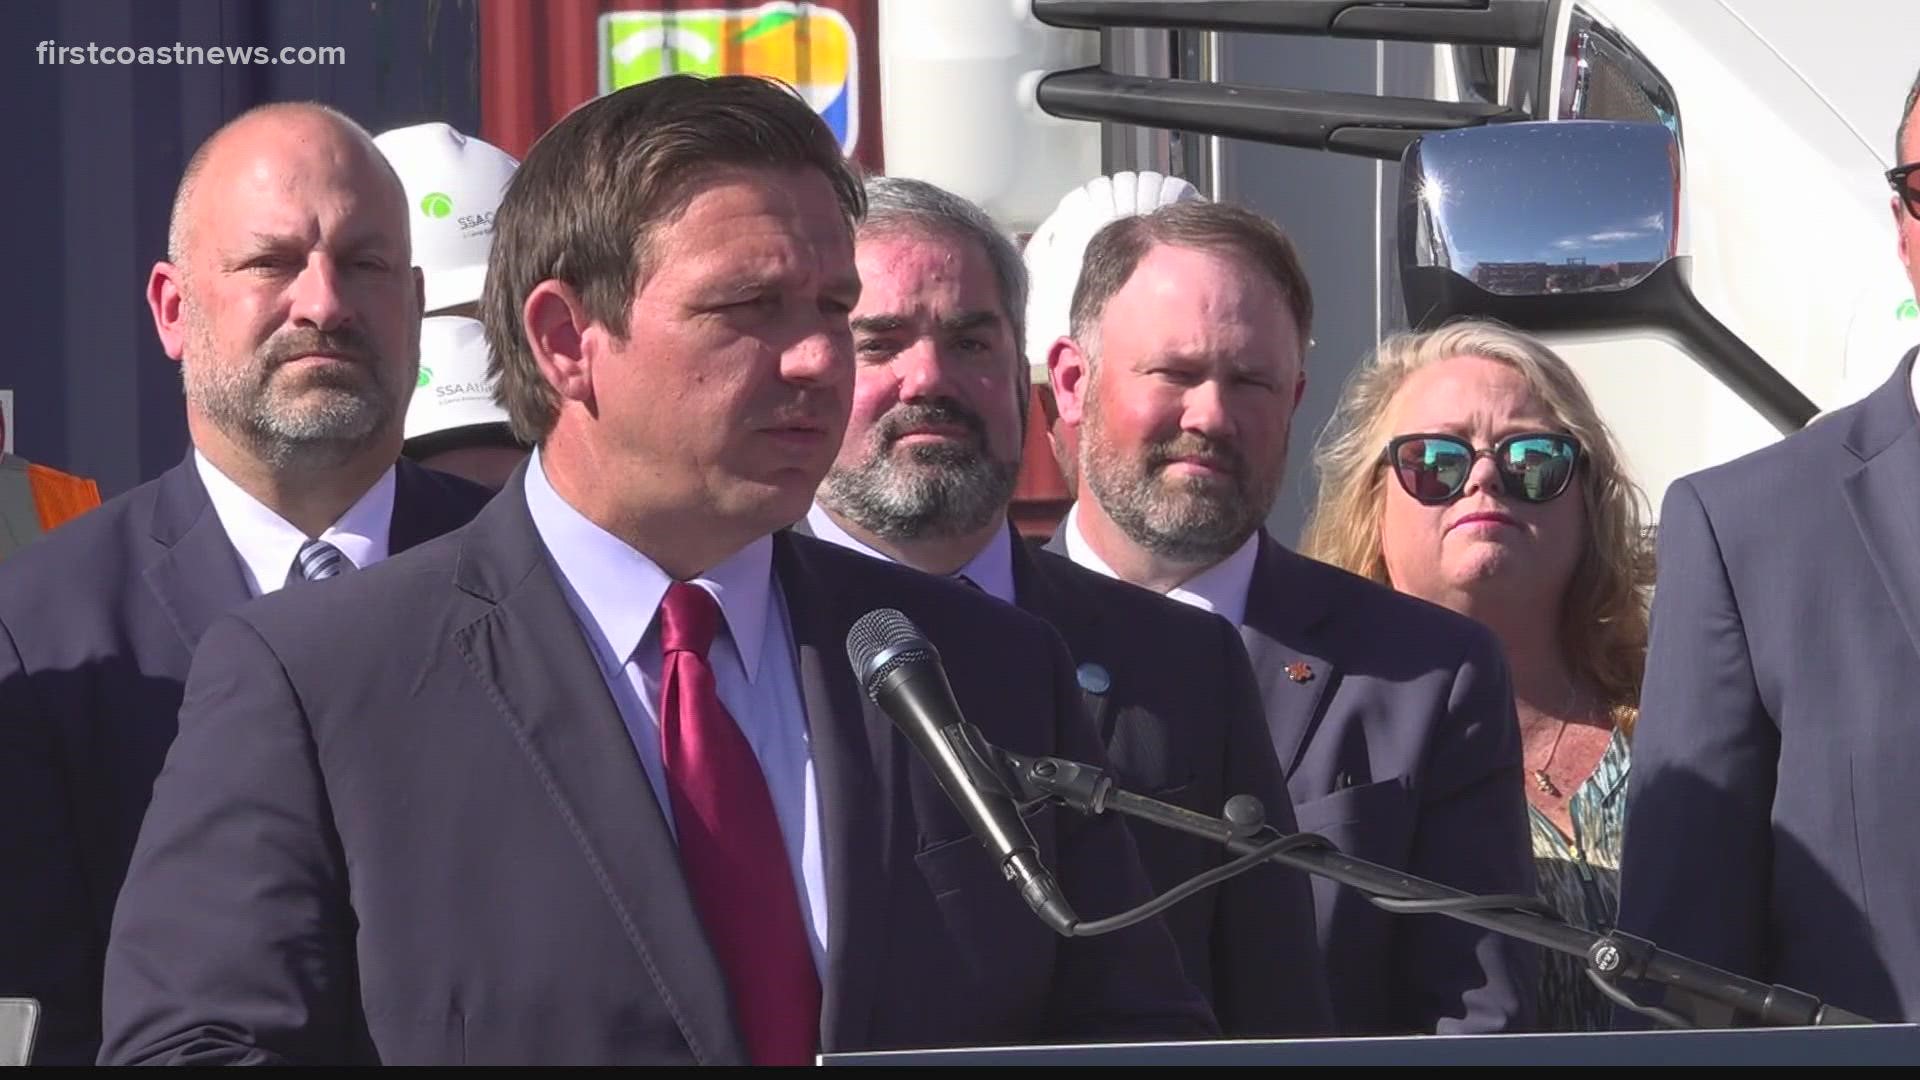 "Our seaports are used to operating around the clock. They're used to moving cargo for American families, farmers and businesses," DeSantis said.